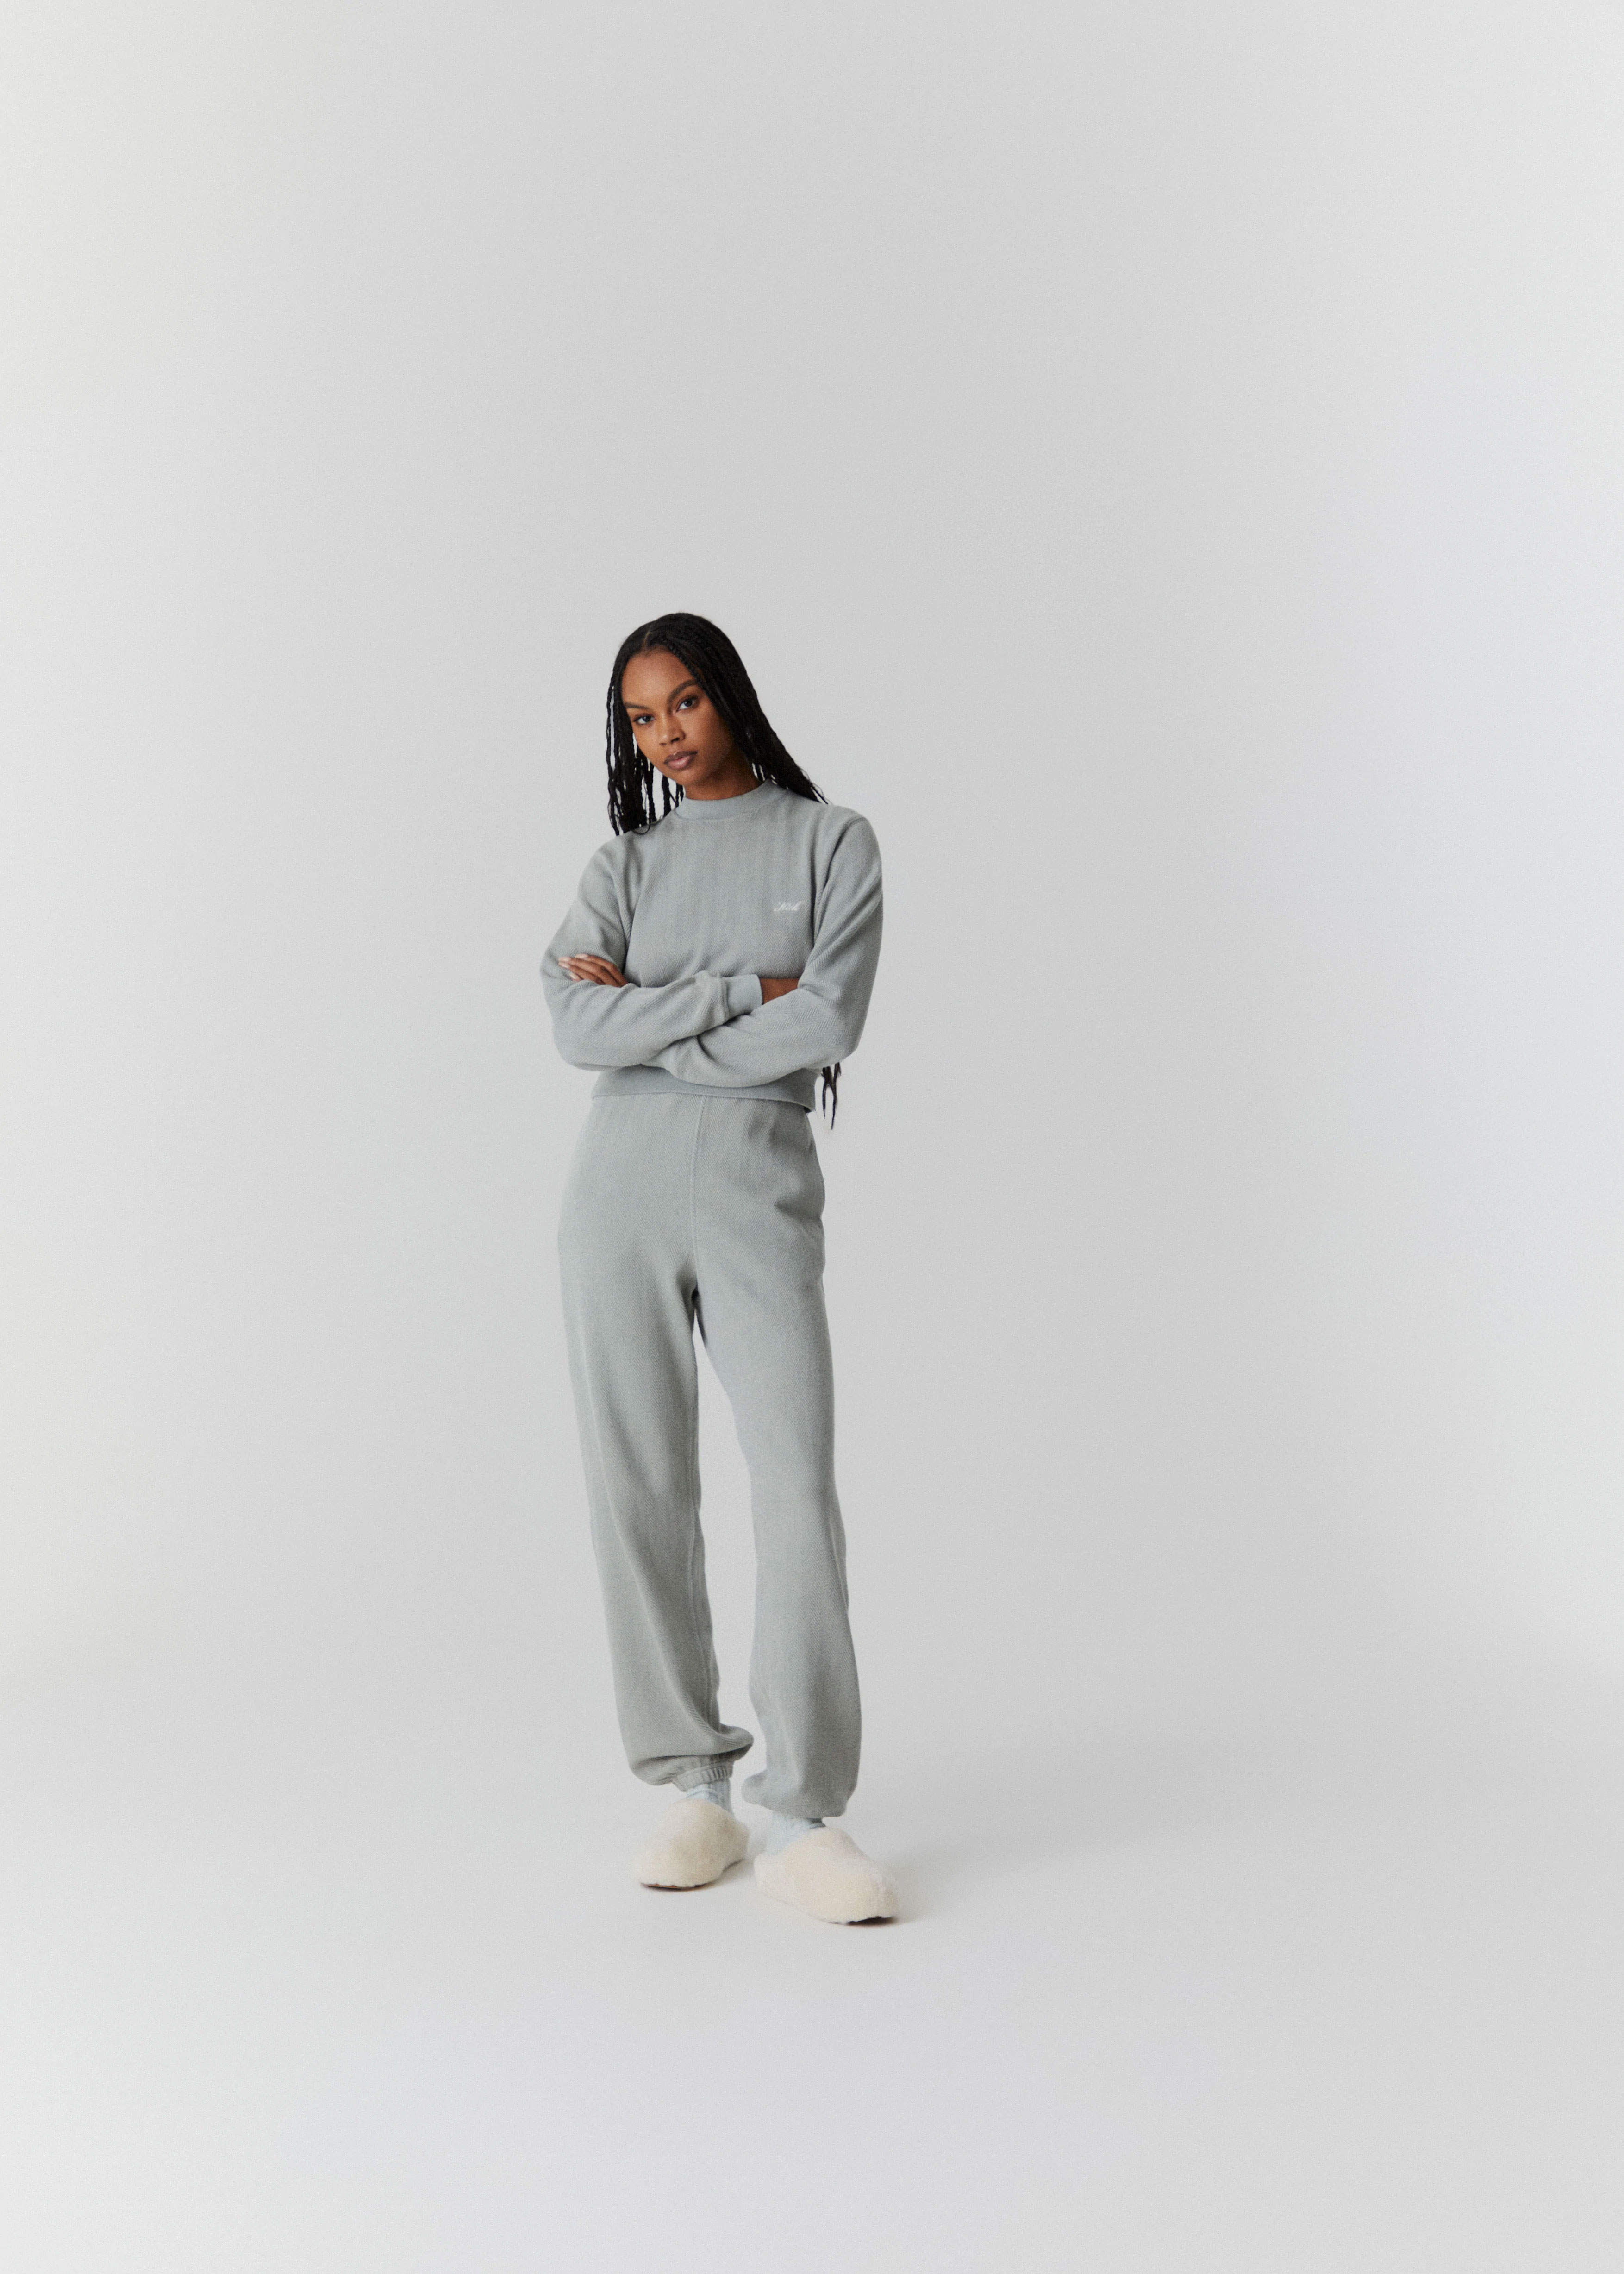 A Look at Kith Women Winter 2022 | SPLY